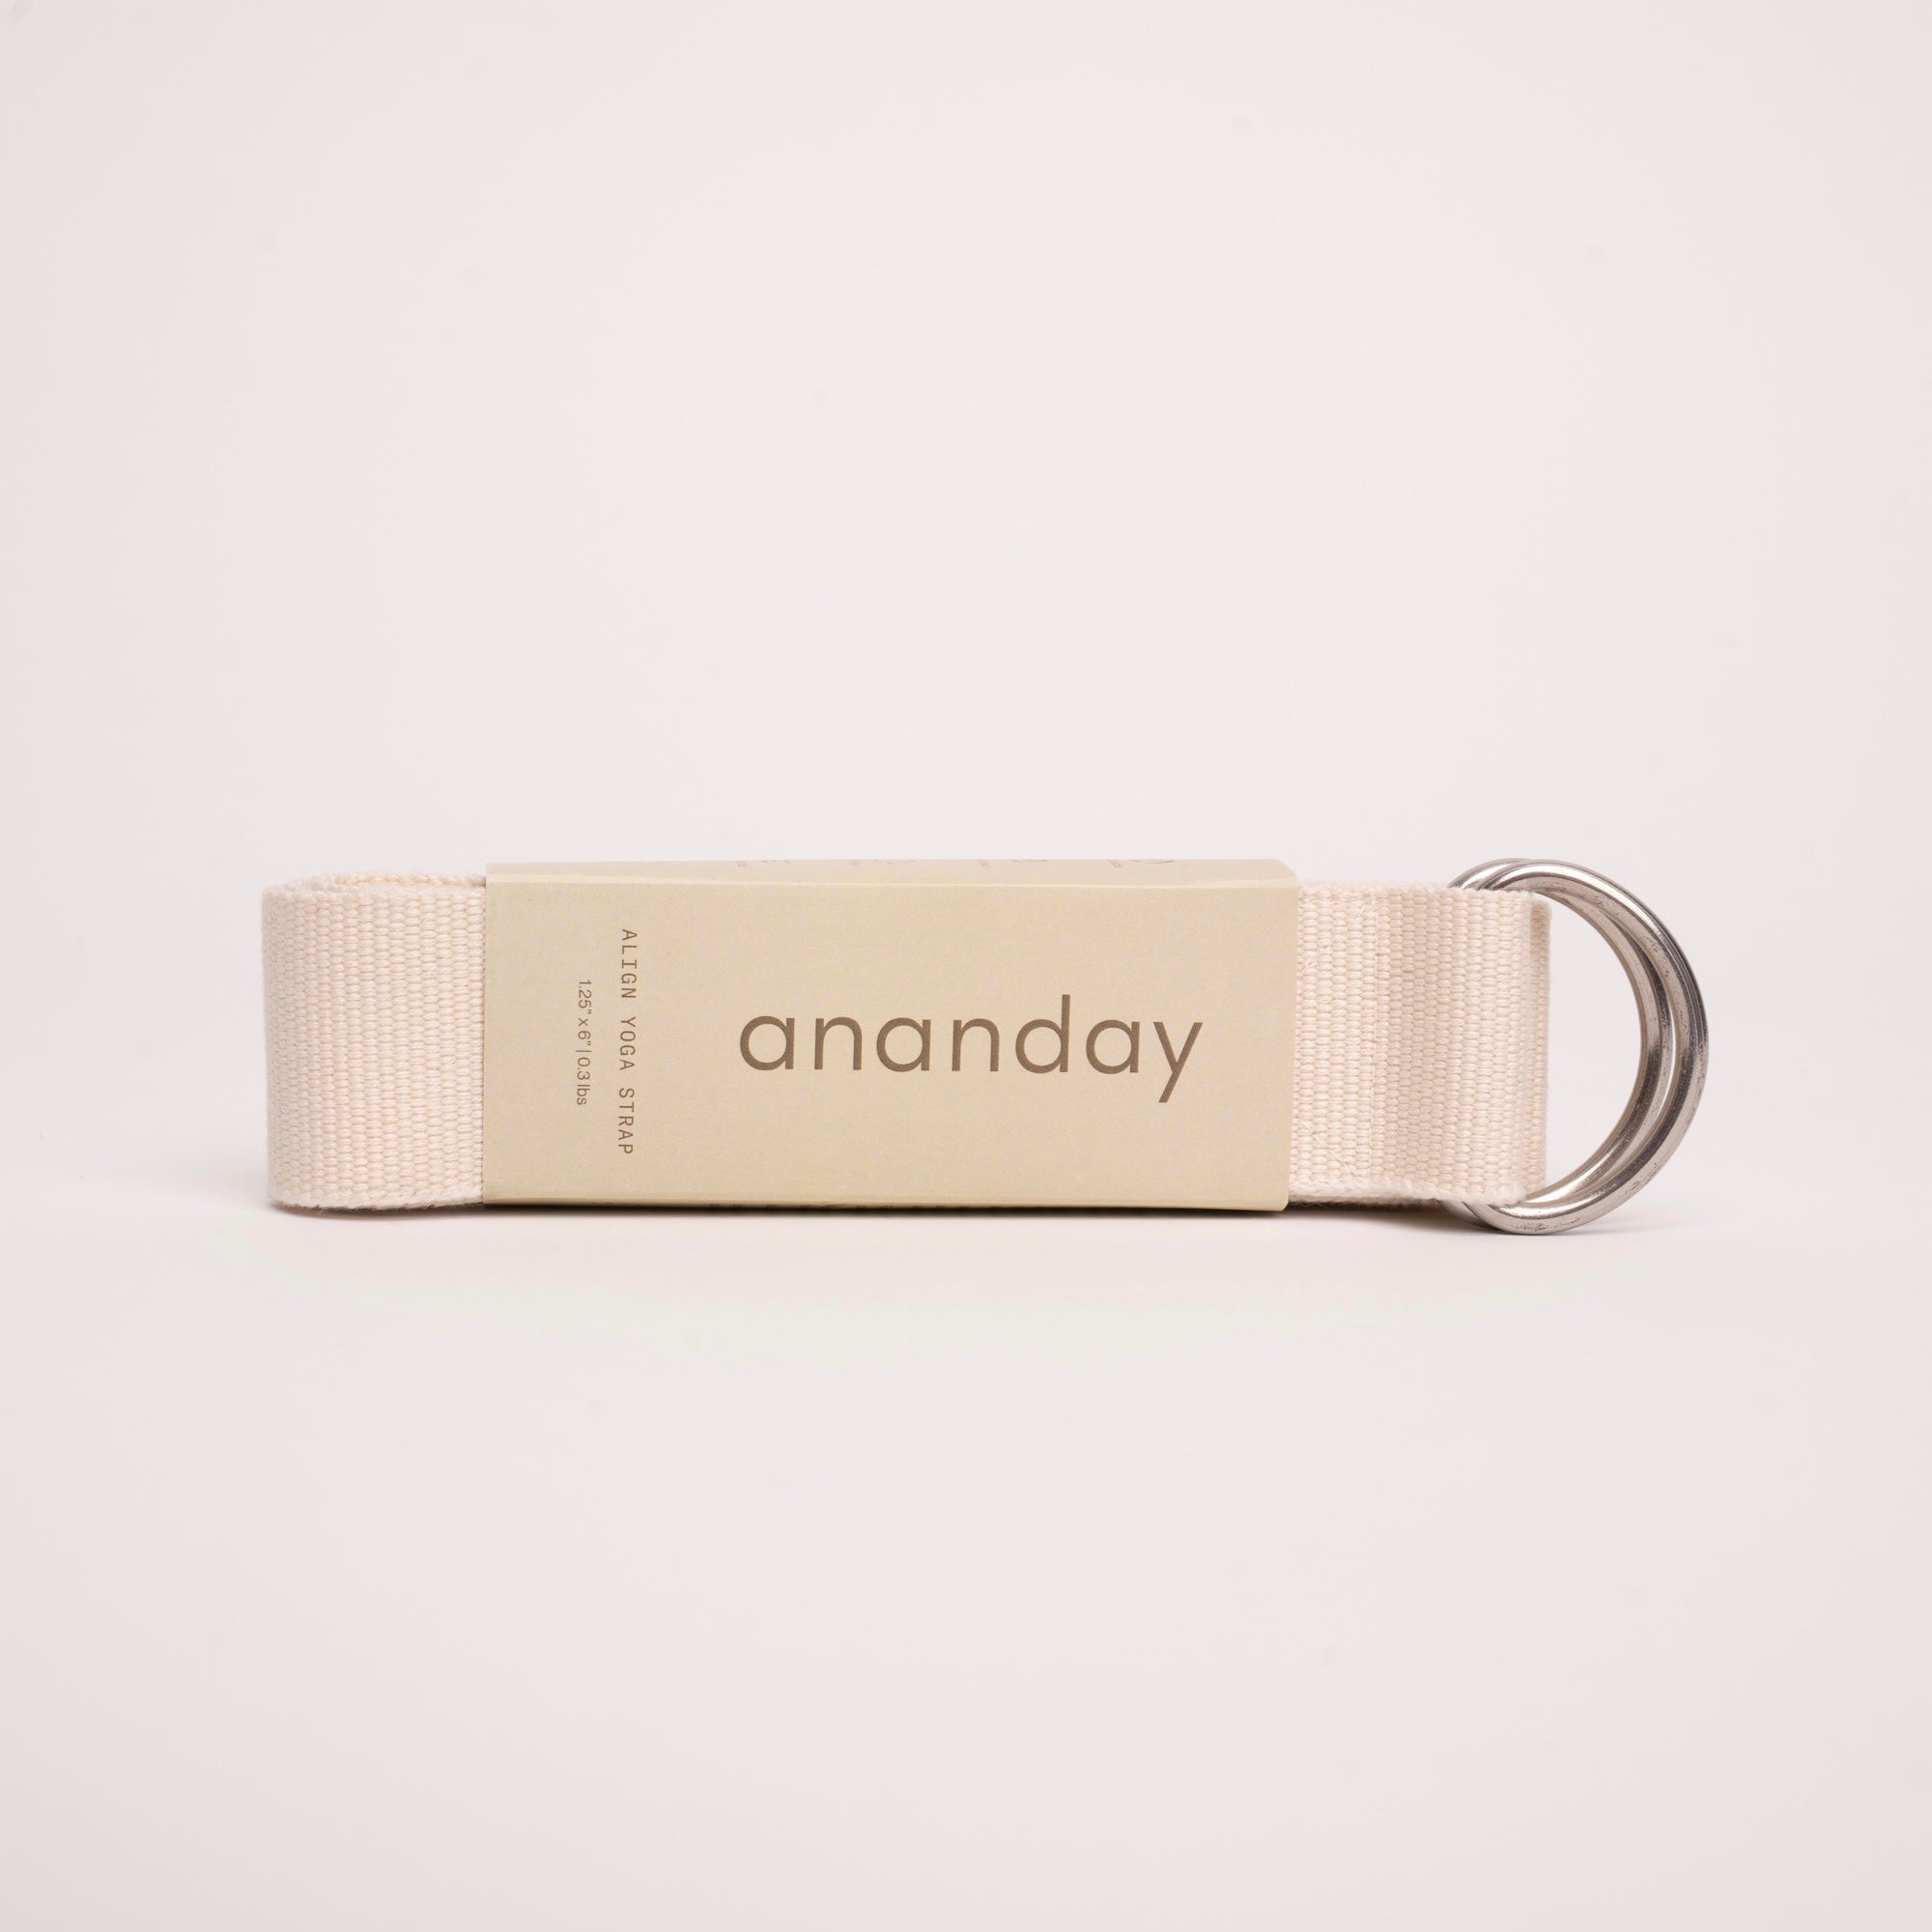 Ananday Yoga Block and Strap Set